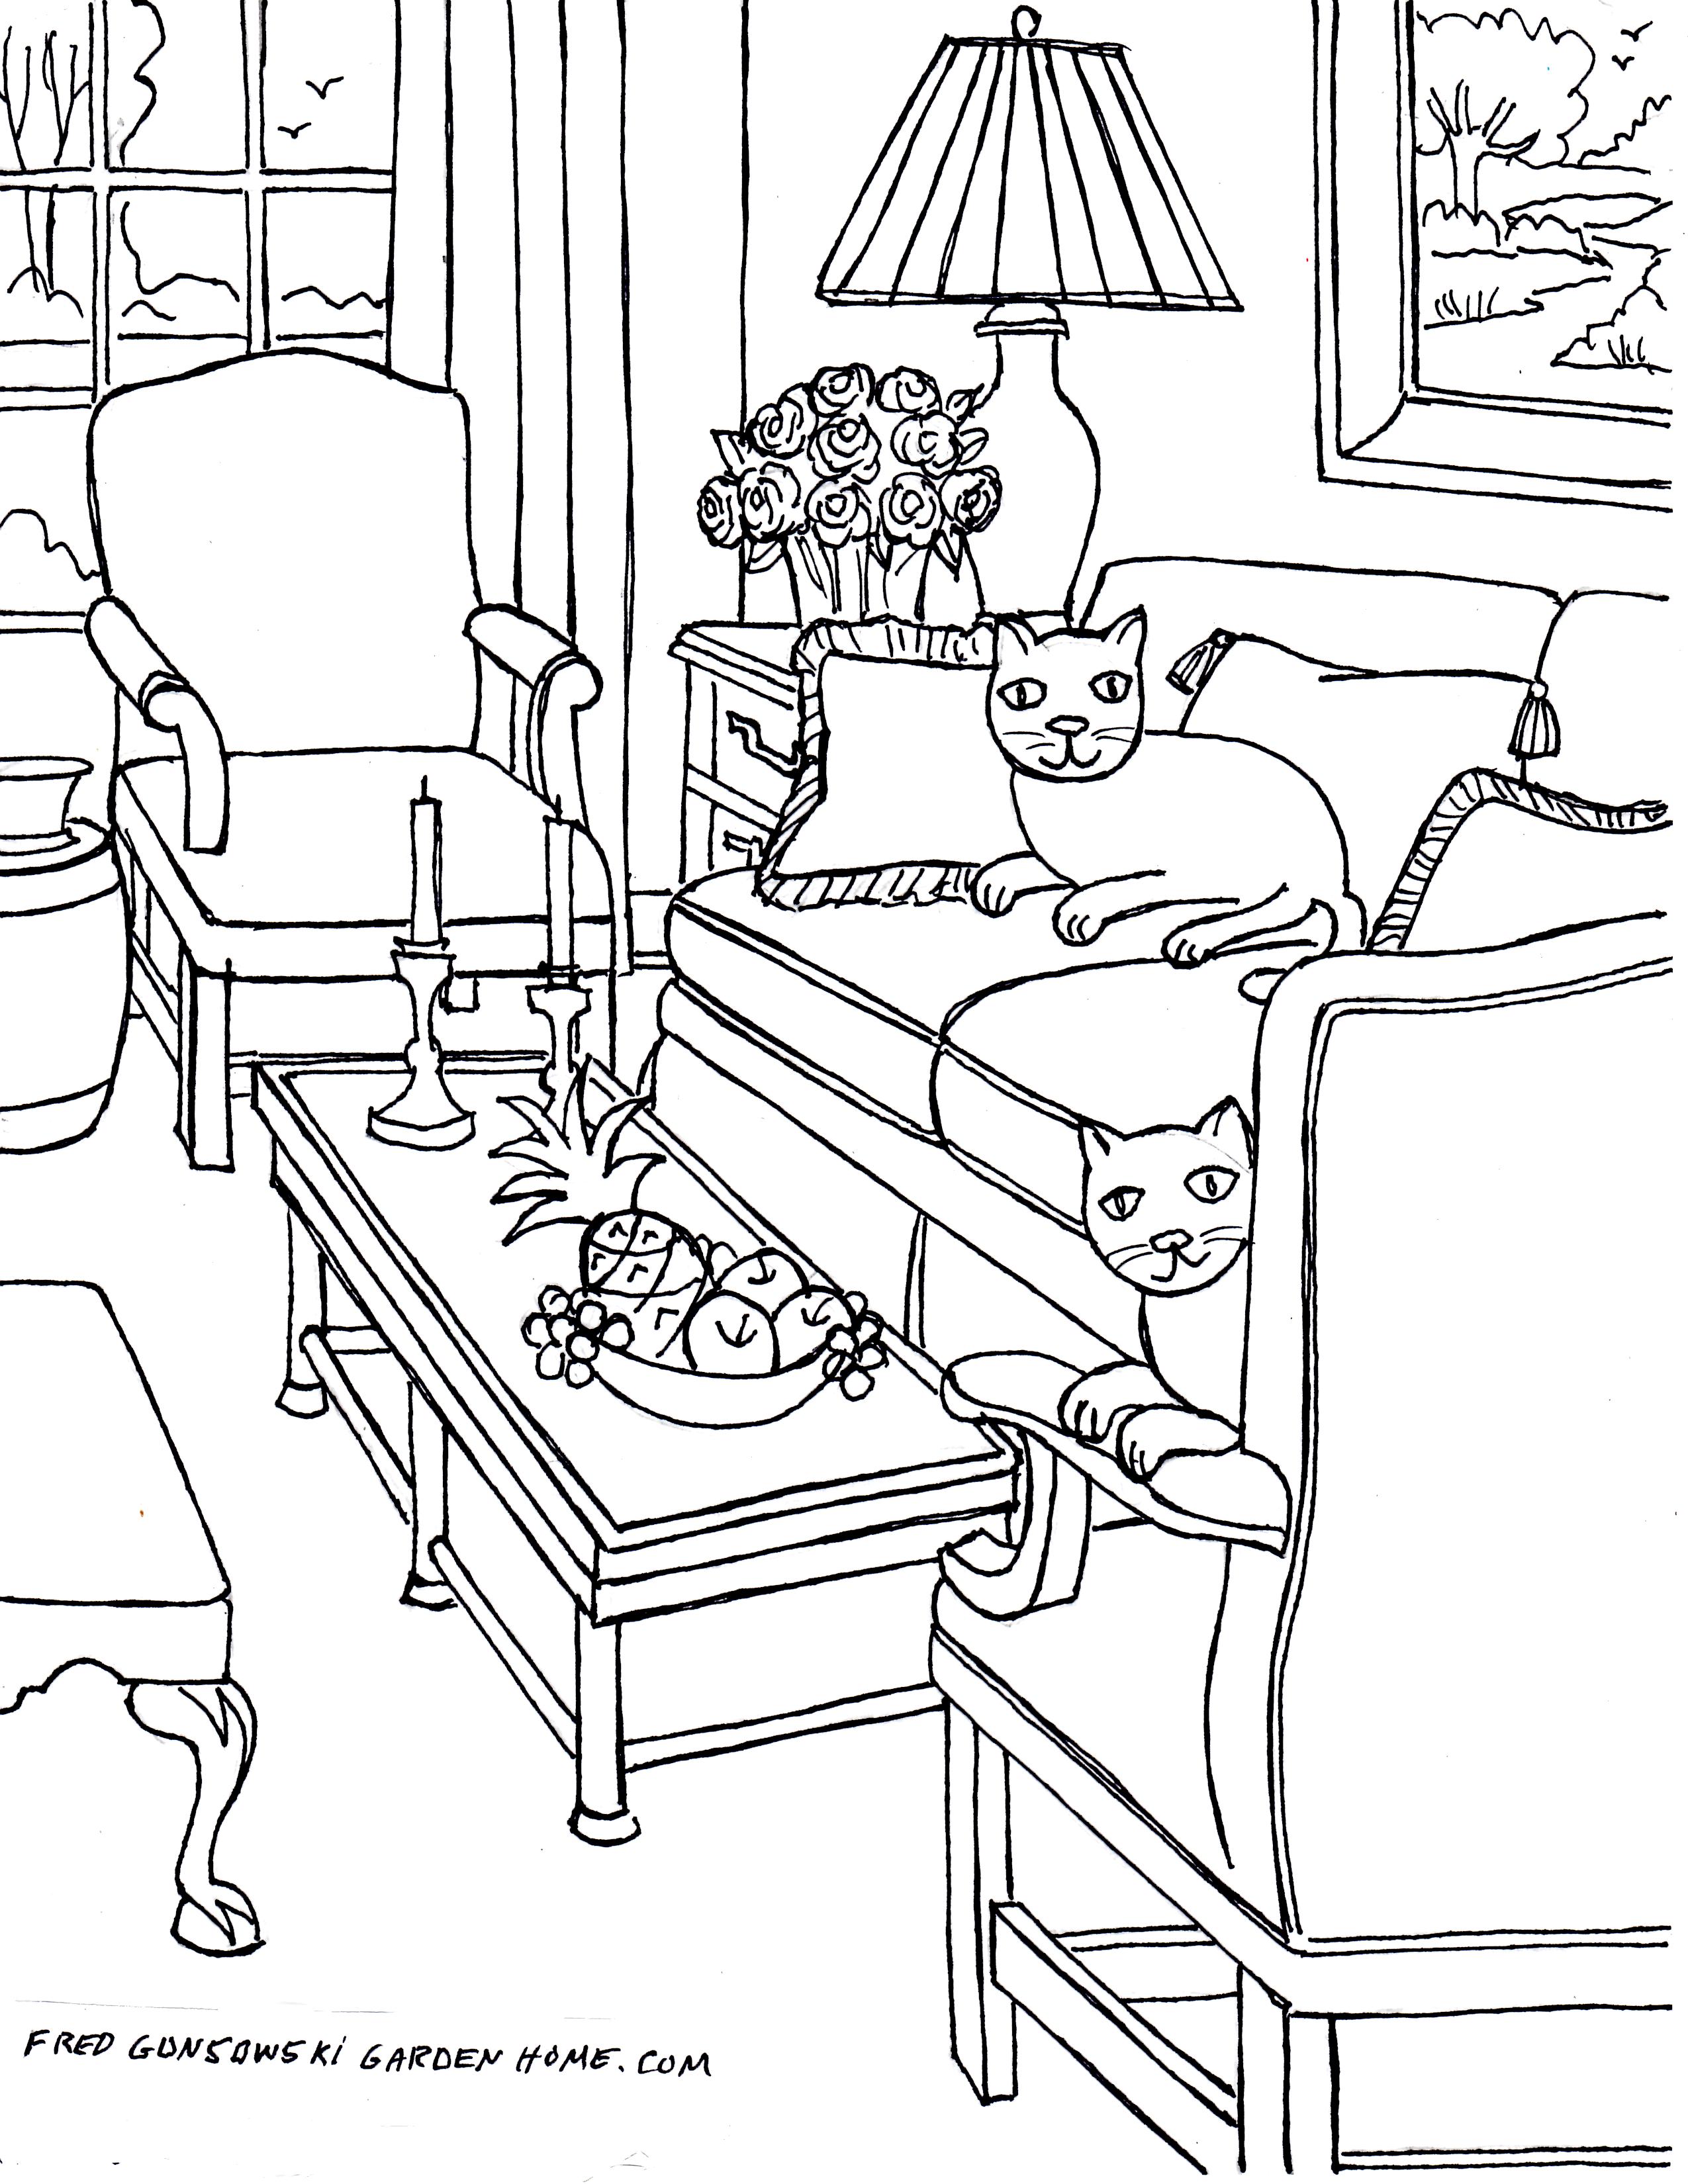 House Interior Coloring Pages at GetDrawings.com | Free for personal